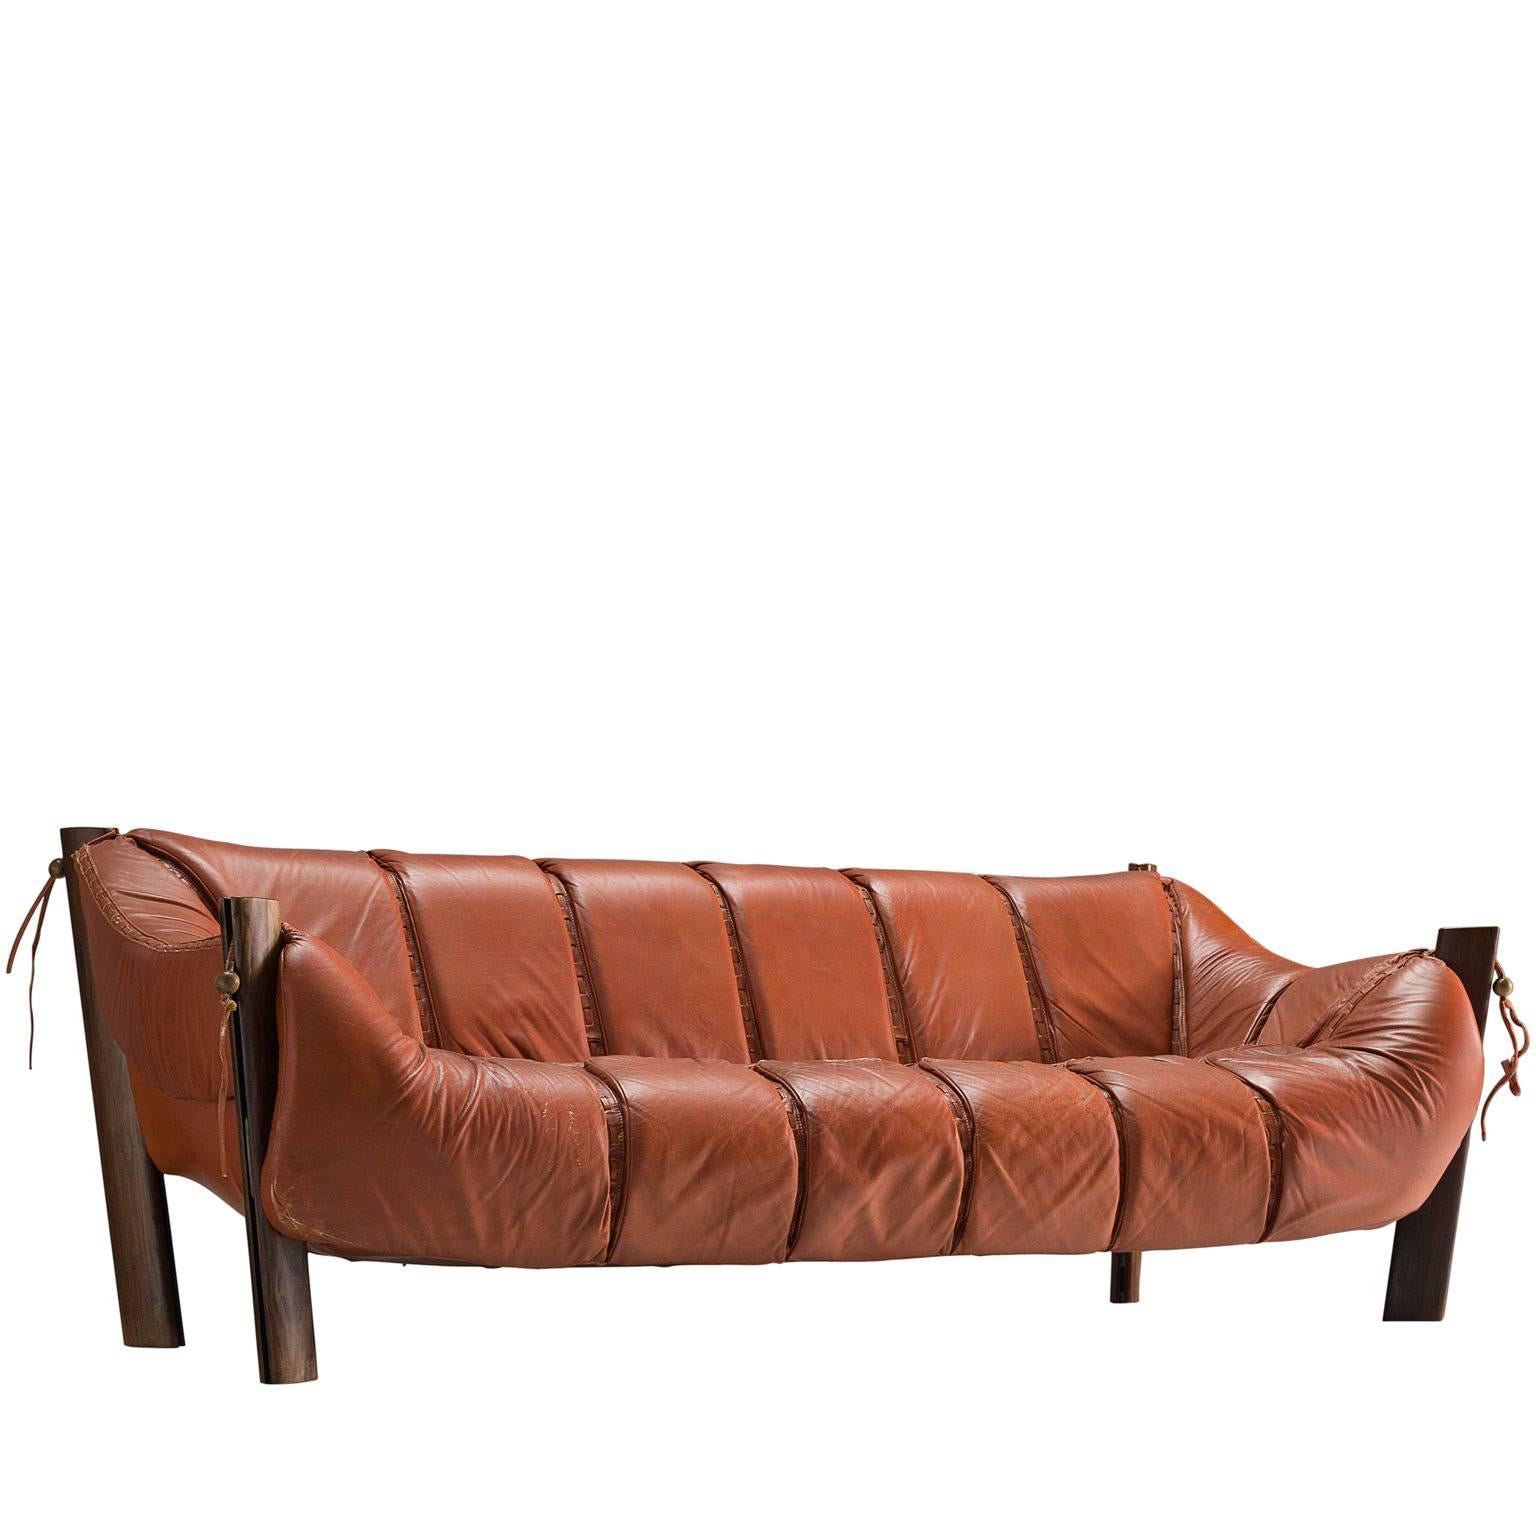 Percival Lafer Three-Seat Sofa in Red Leather